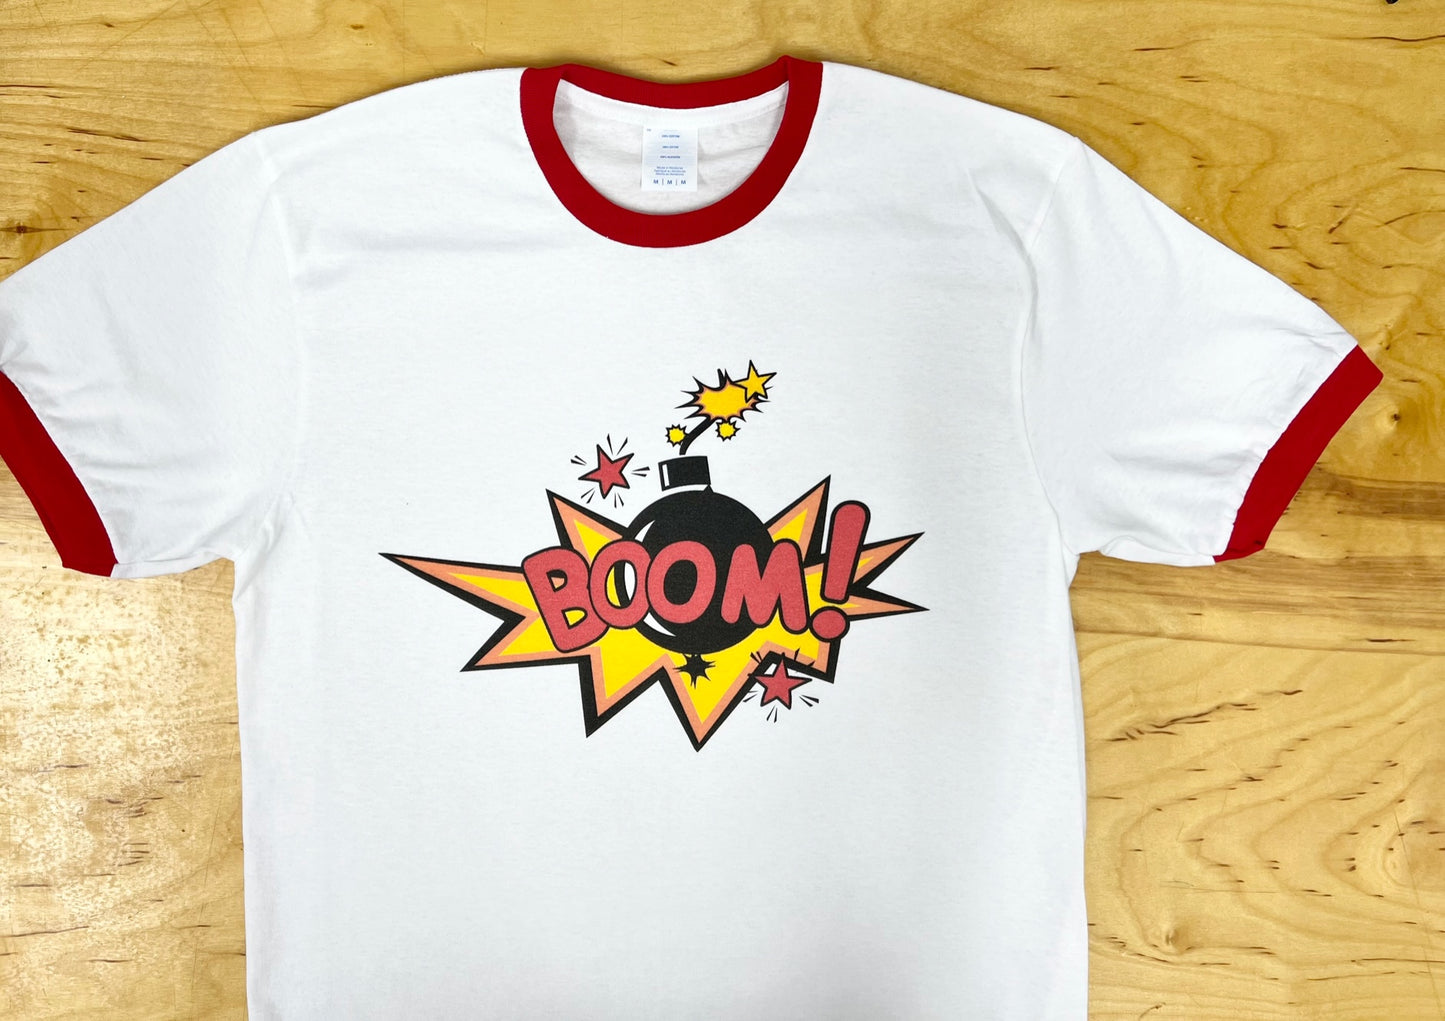 BOOM Goes The Dynamite Red and White Ringer T-Shirt